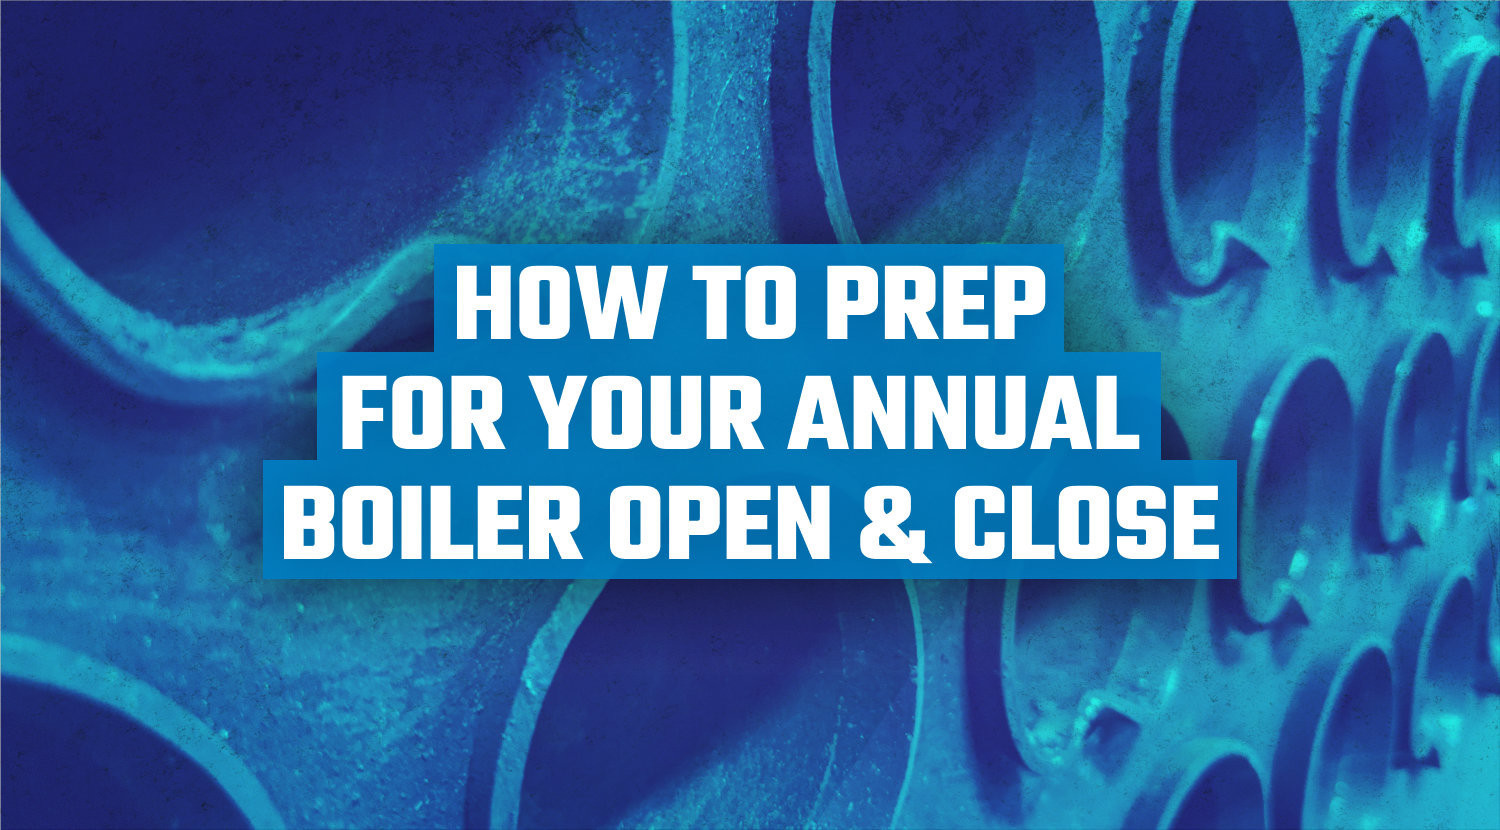 Boiler Open and Close: Preparation and Tips